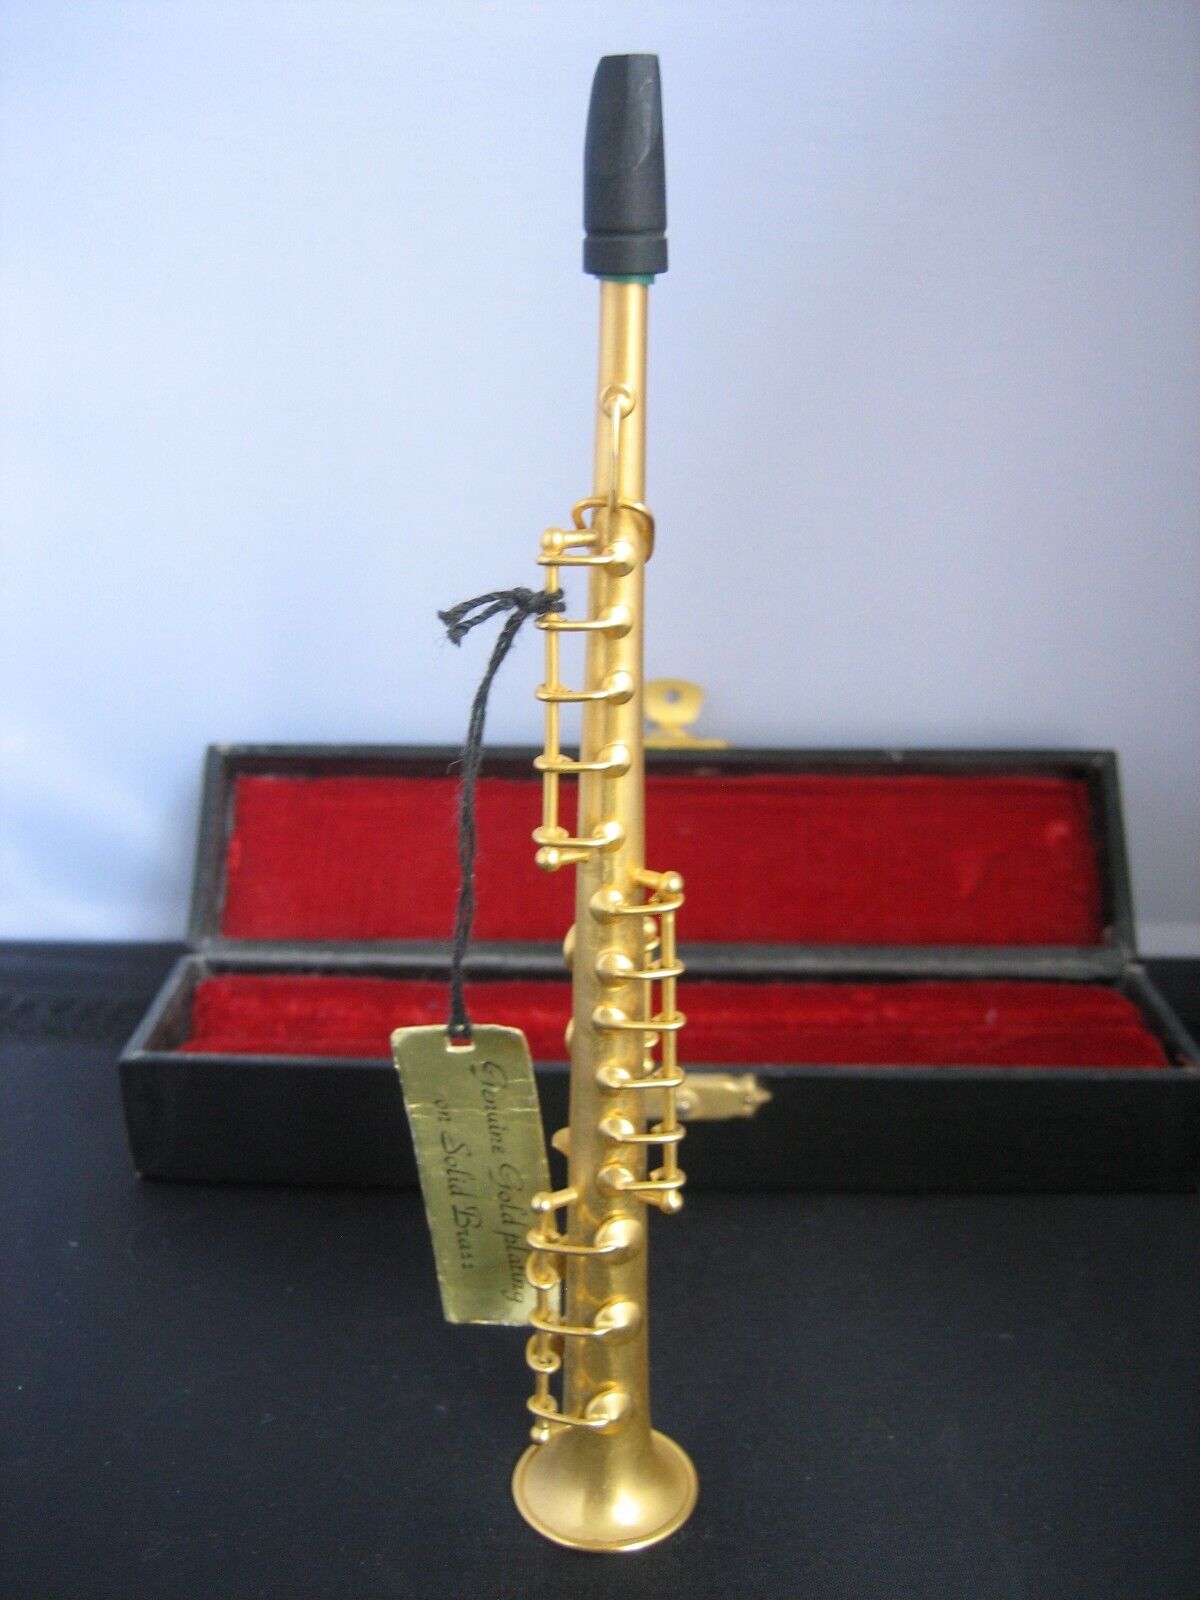 Vintage Genuine Gold plating on Solid Brass miniature saxophone and original box